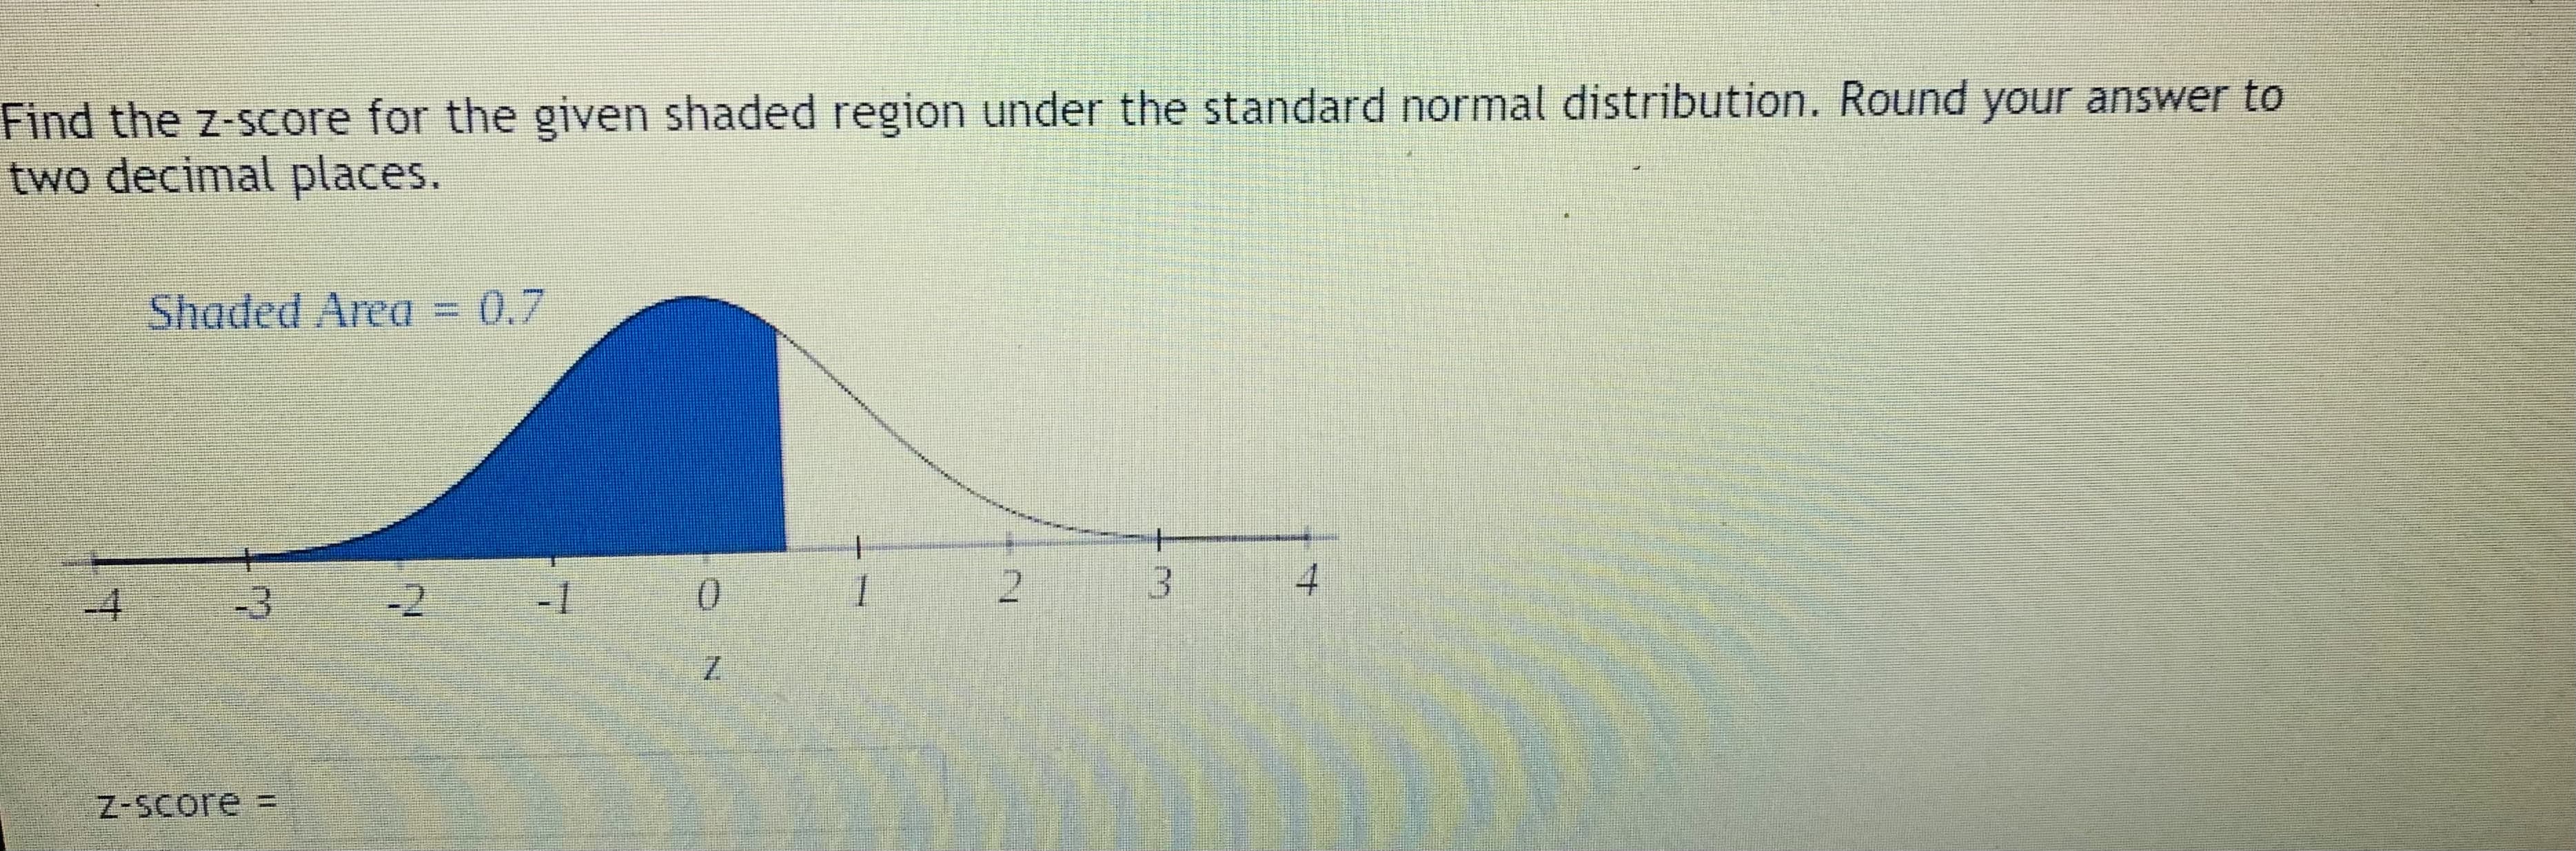 Find the z-score for the given shaded region under the standard normal distribution. Round your answer to
two decimal places.
Shaded Area = 0.7
